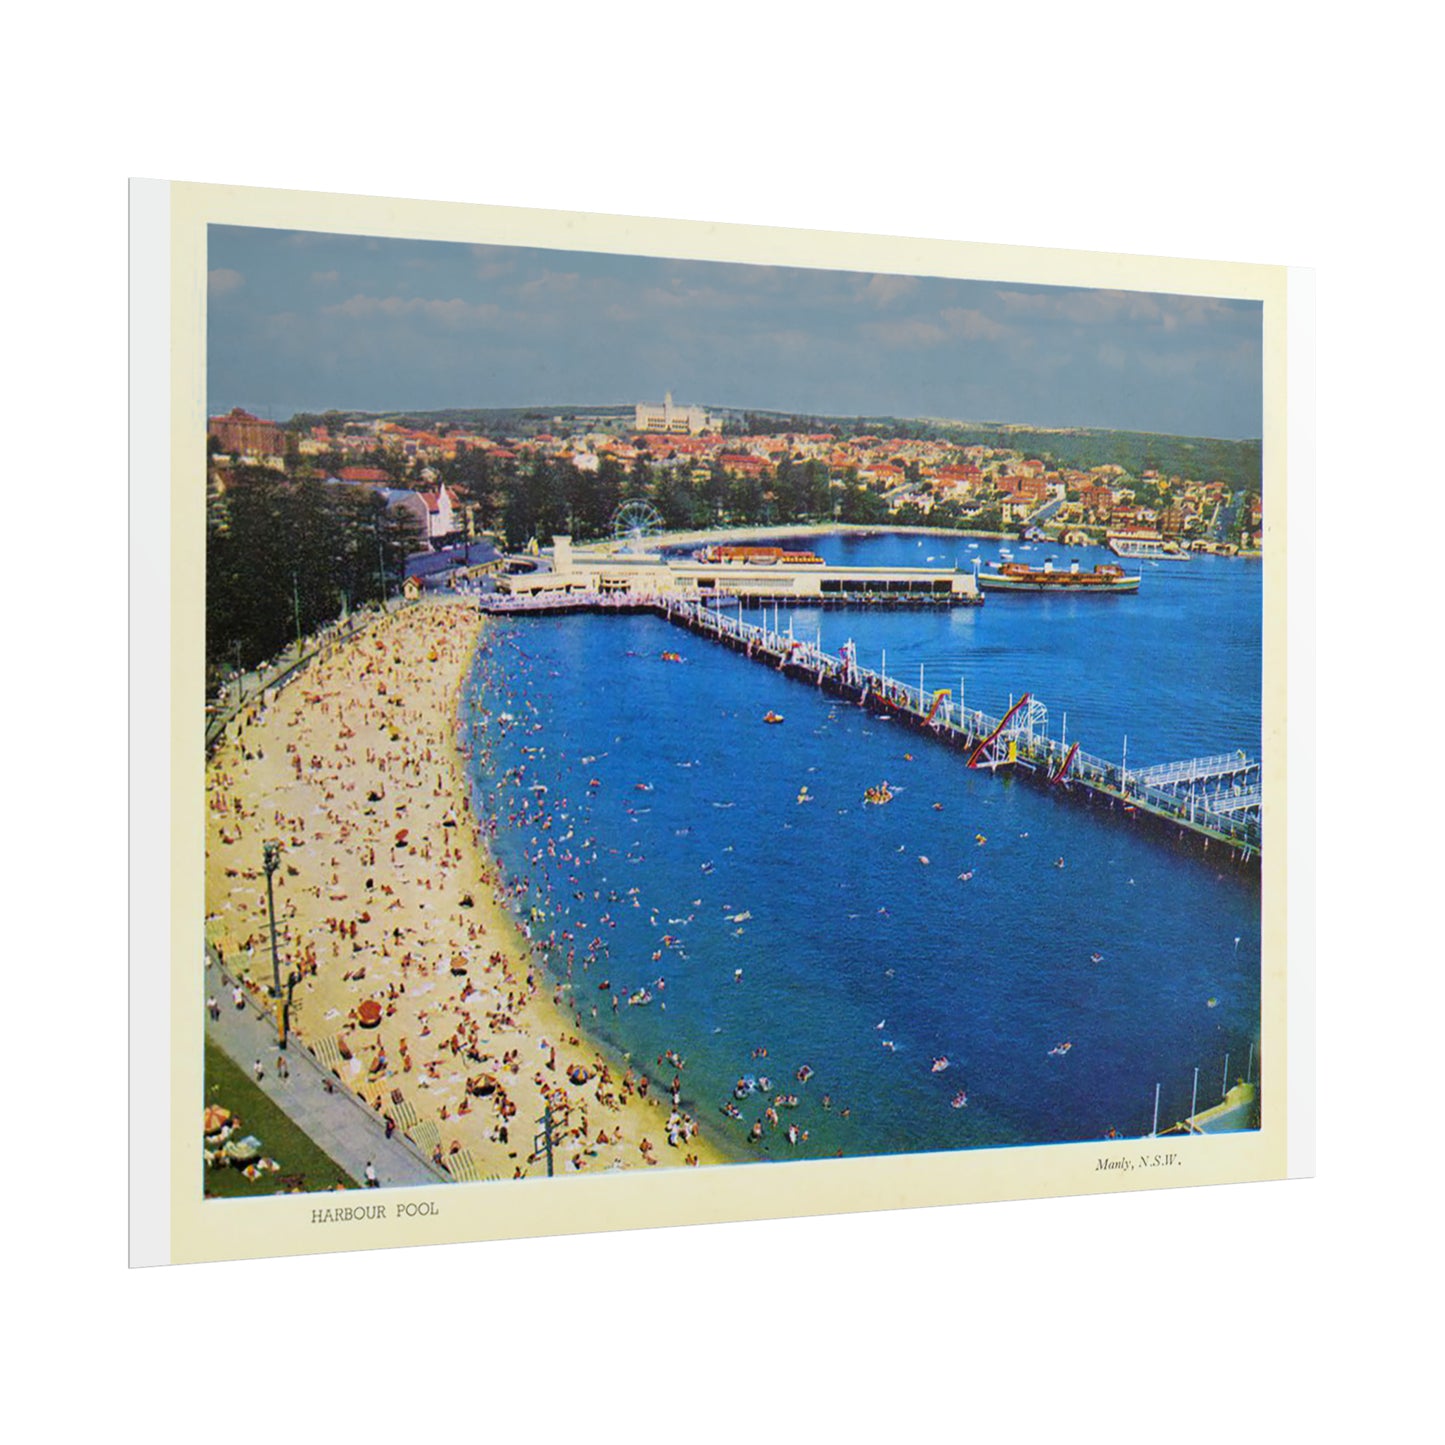 Manly Harbour Pool and Promenade 1955 Rolled Posters